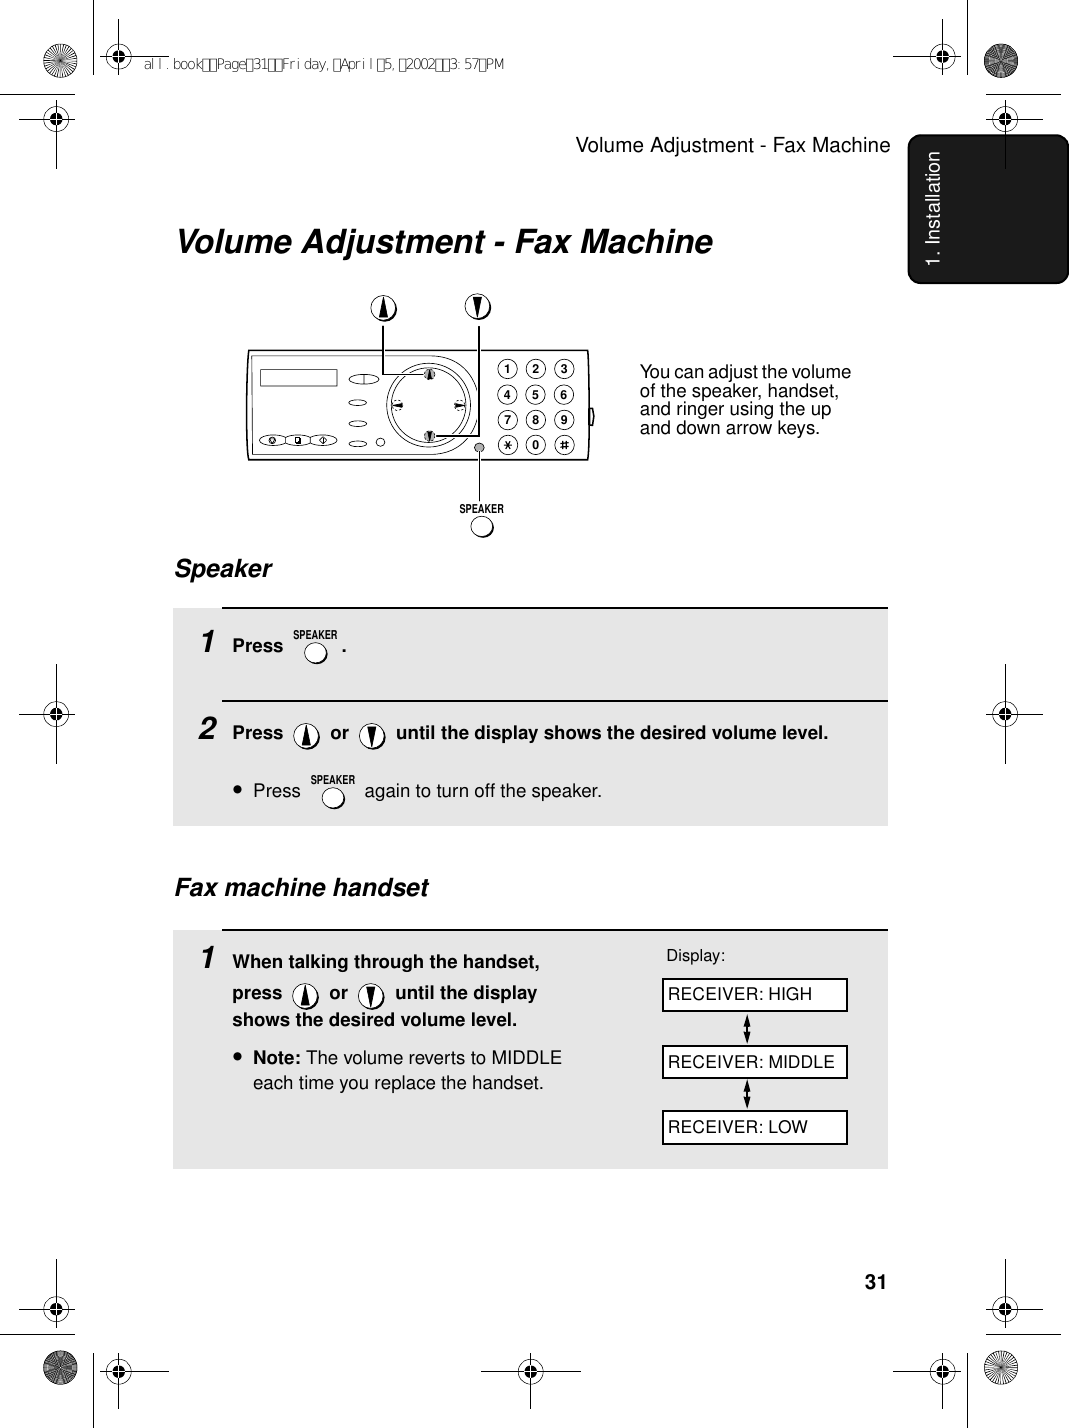 Volume Adjustment - Fax Machine311. InstallationVolume Adjustment - Fax Machine1Press .2Press   or   until the display shows the desired volume level. •Press   again to turn off the speaker.SPEAKERSPEAKERSpeaker1945 67802 3SPEAKER1When talking through the handset, press   or   until the display shows the desired volume level.•Note: The volume reverts to MIDDLE each time you replace the handset.Display:Fax machine handsetRECEIVER: HIGHRECEIVER: MIDDLERECEIVER: LOWYou can adjust the volume of the speaker, handset, and ringer using the up and down arrow keys.all.bookPage31Friday,April5,20023:57PM